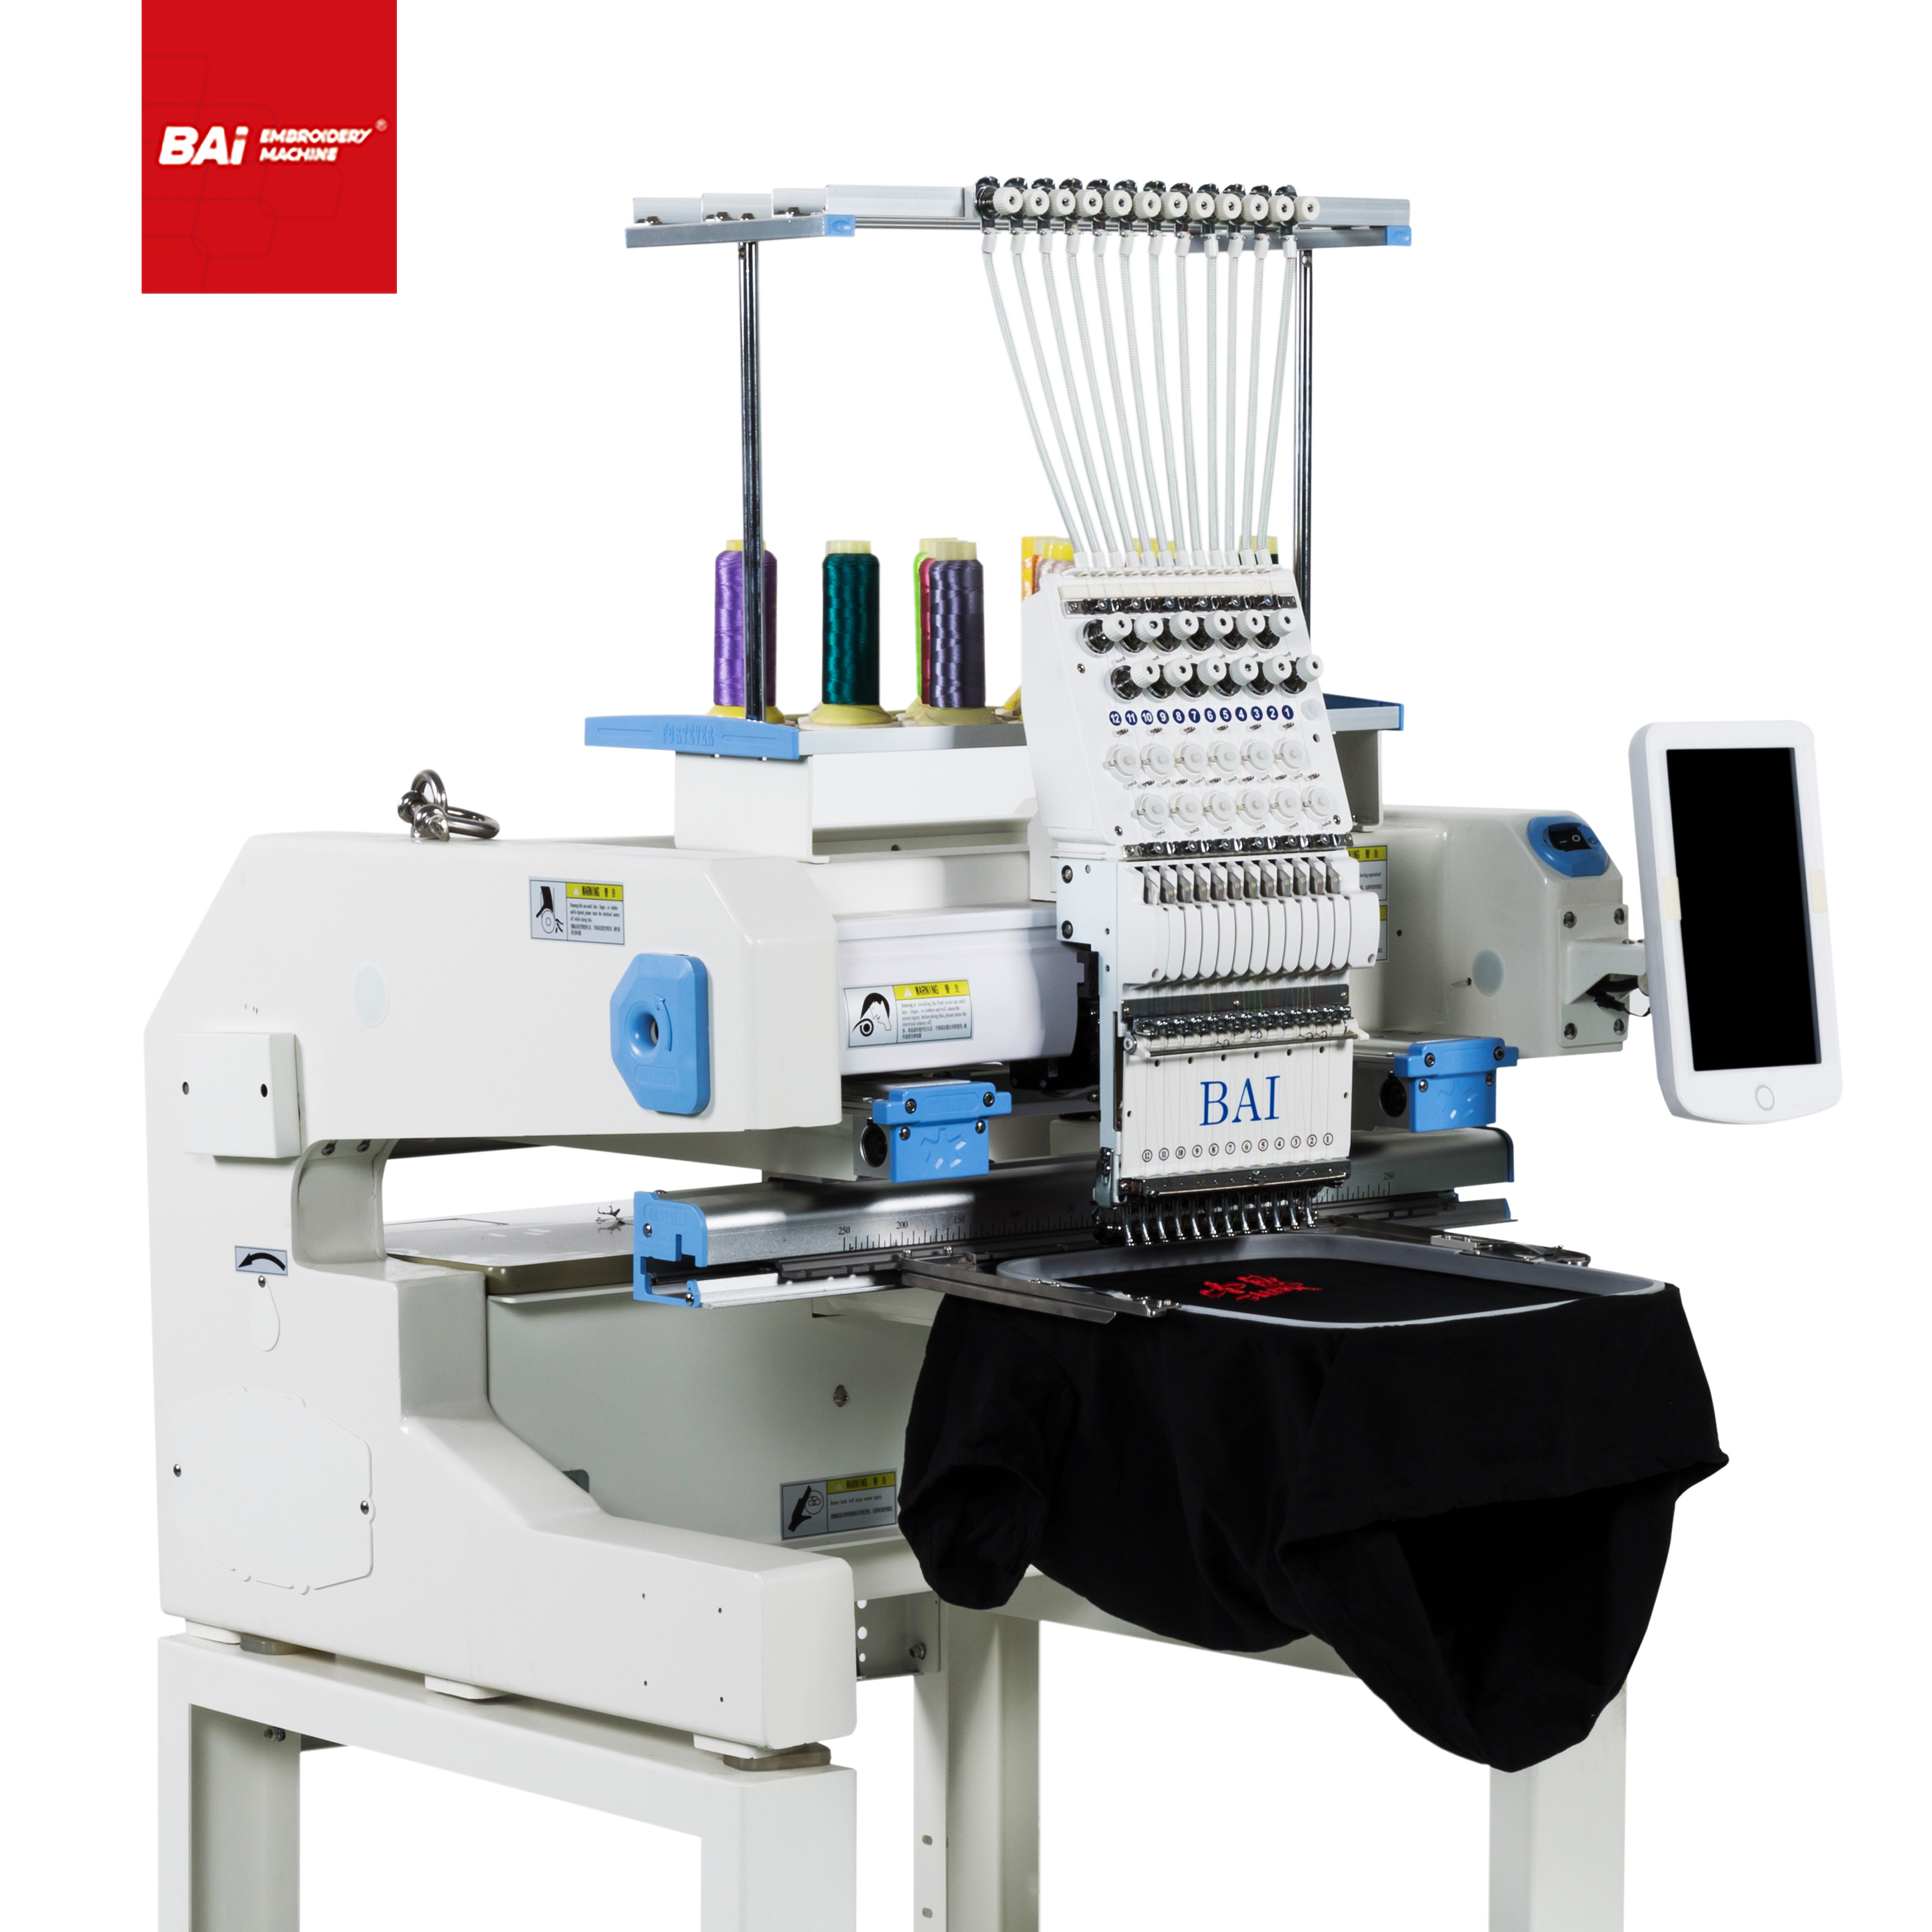 BAI Embroidery Machine for Clothes for Twelve Needle Embroidery Machine